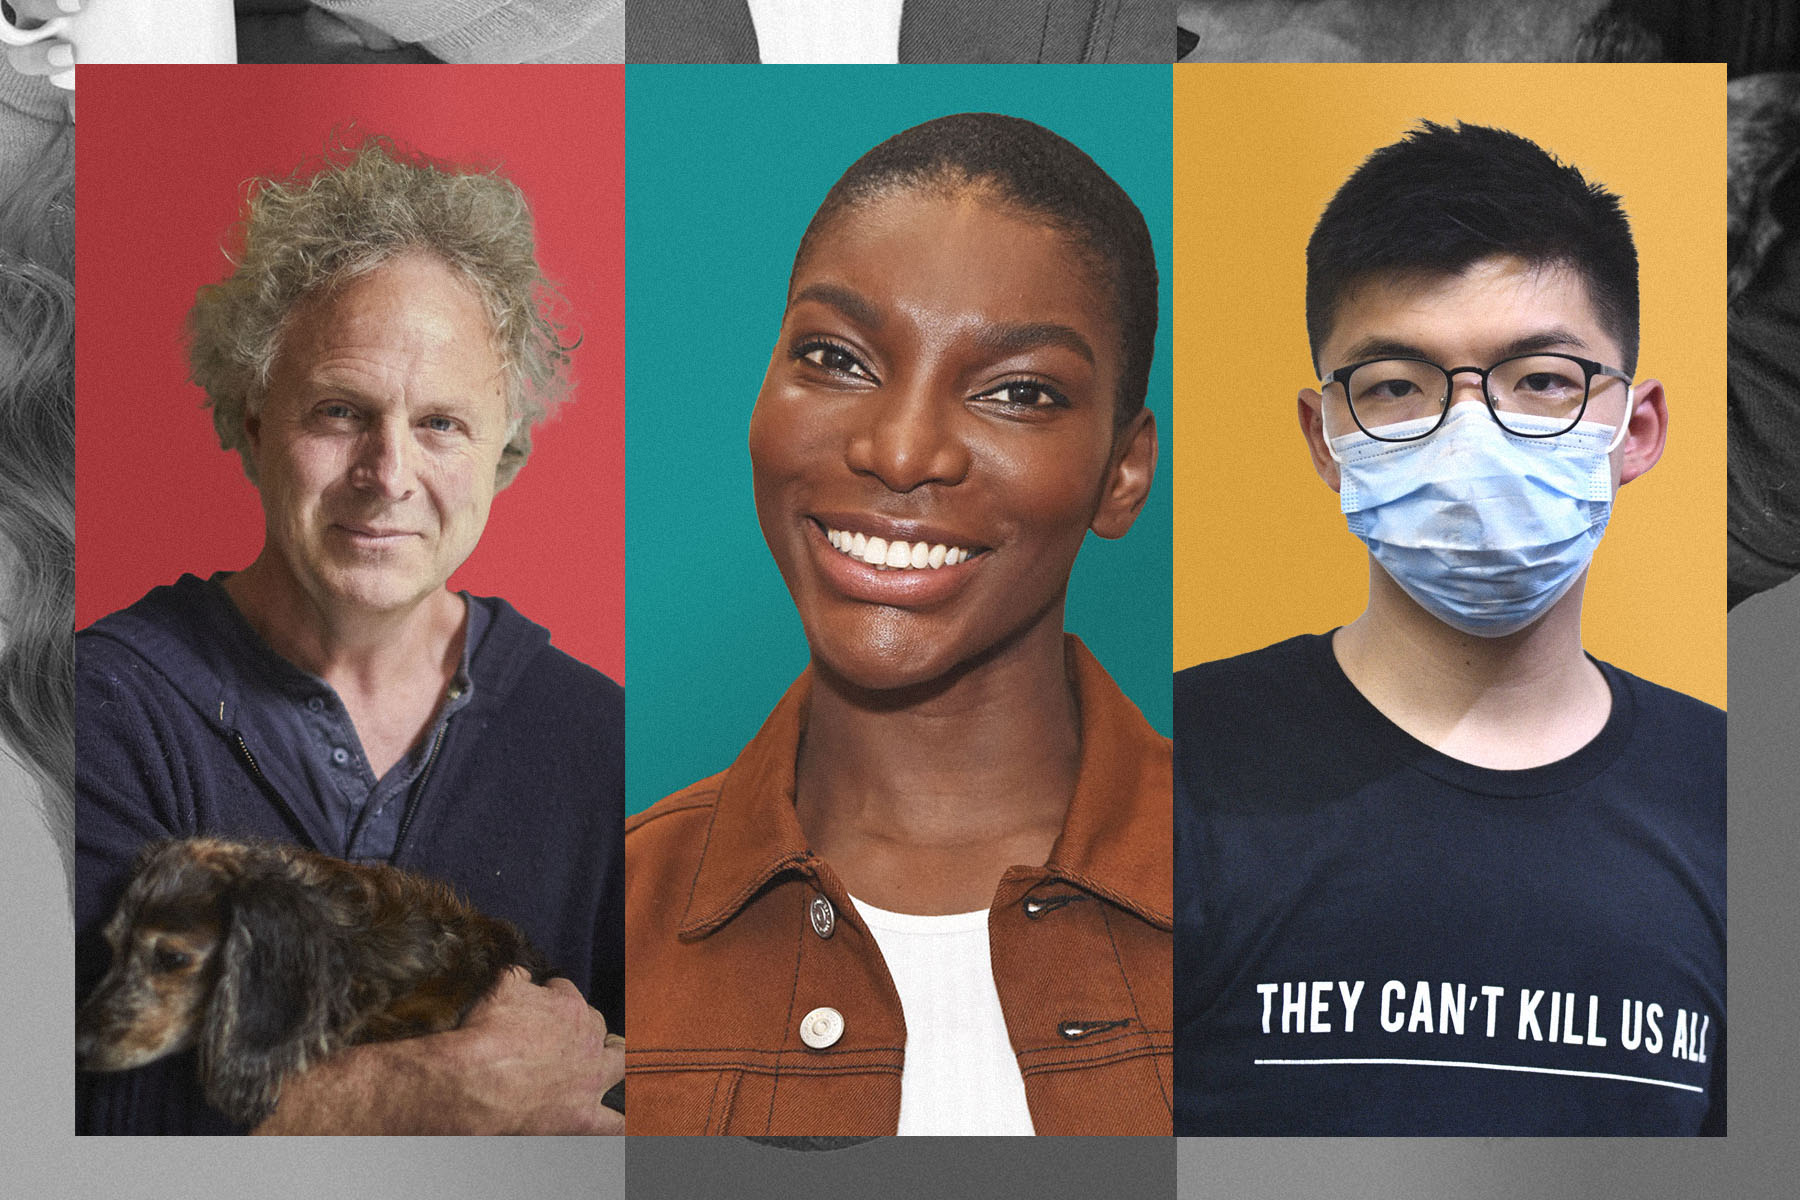 Three portraits of Charlie Mackesy, Michaela Coel and Joshua Wong side-by-side on different coloured backgrounds